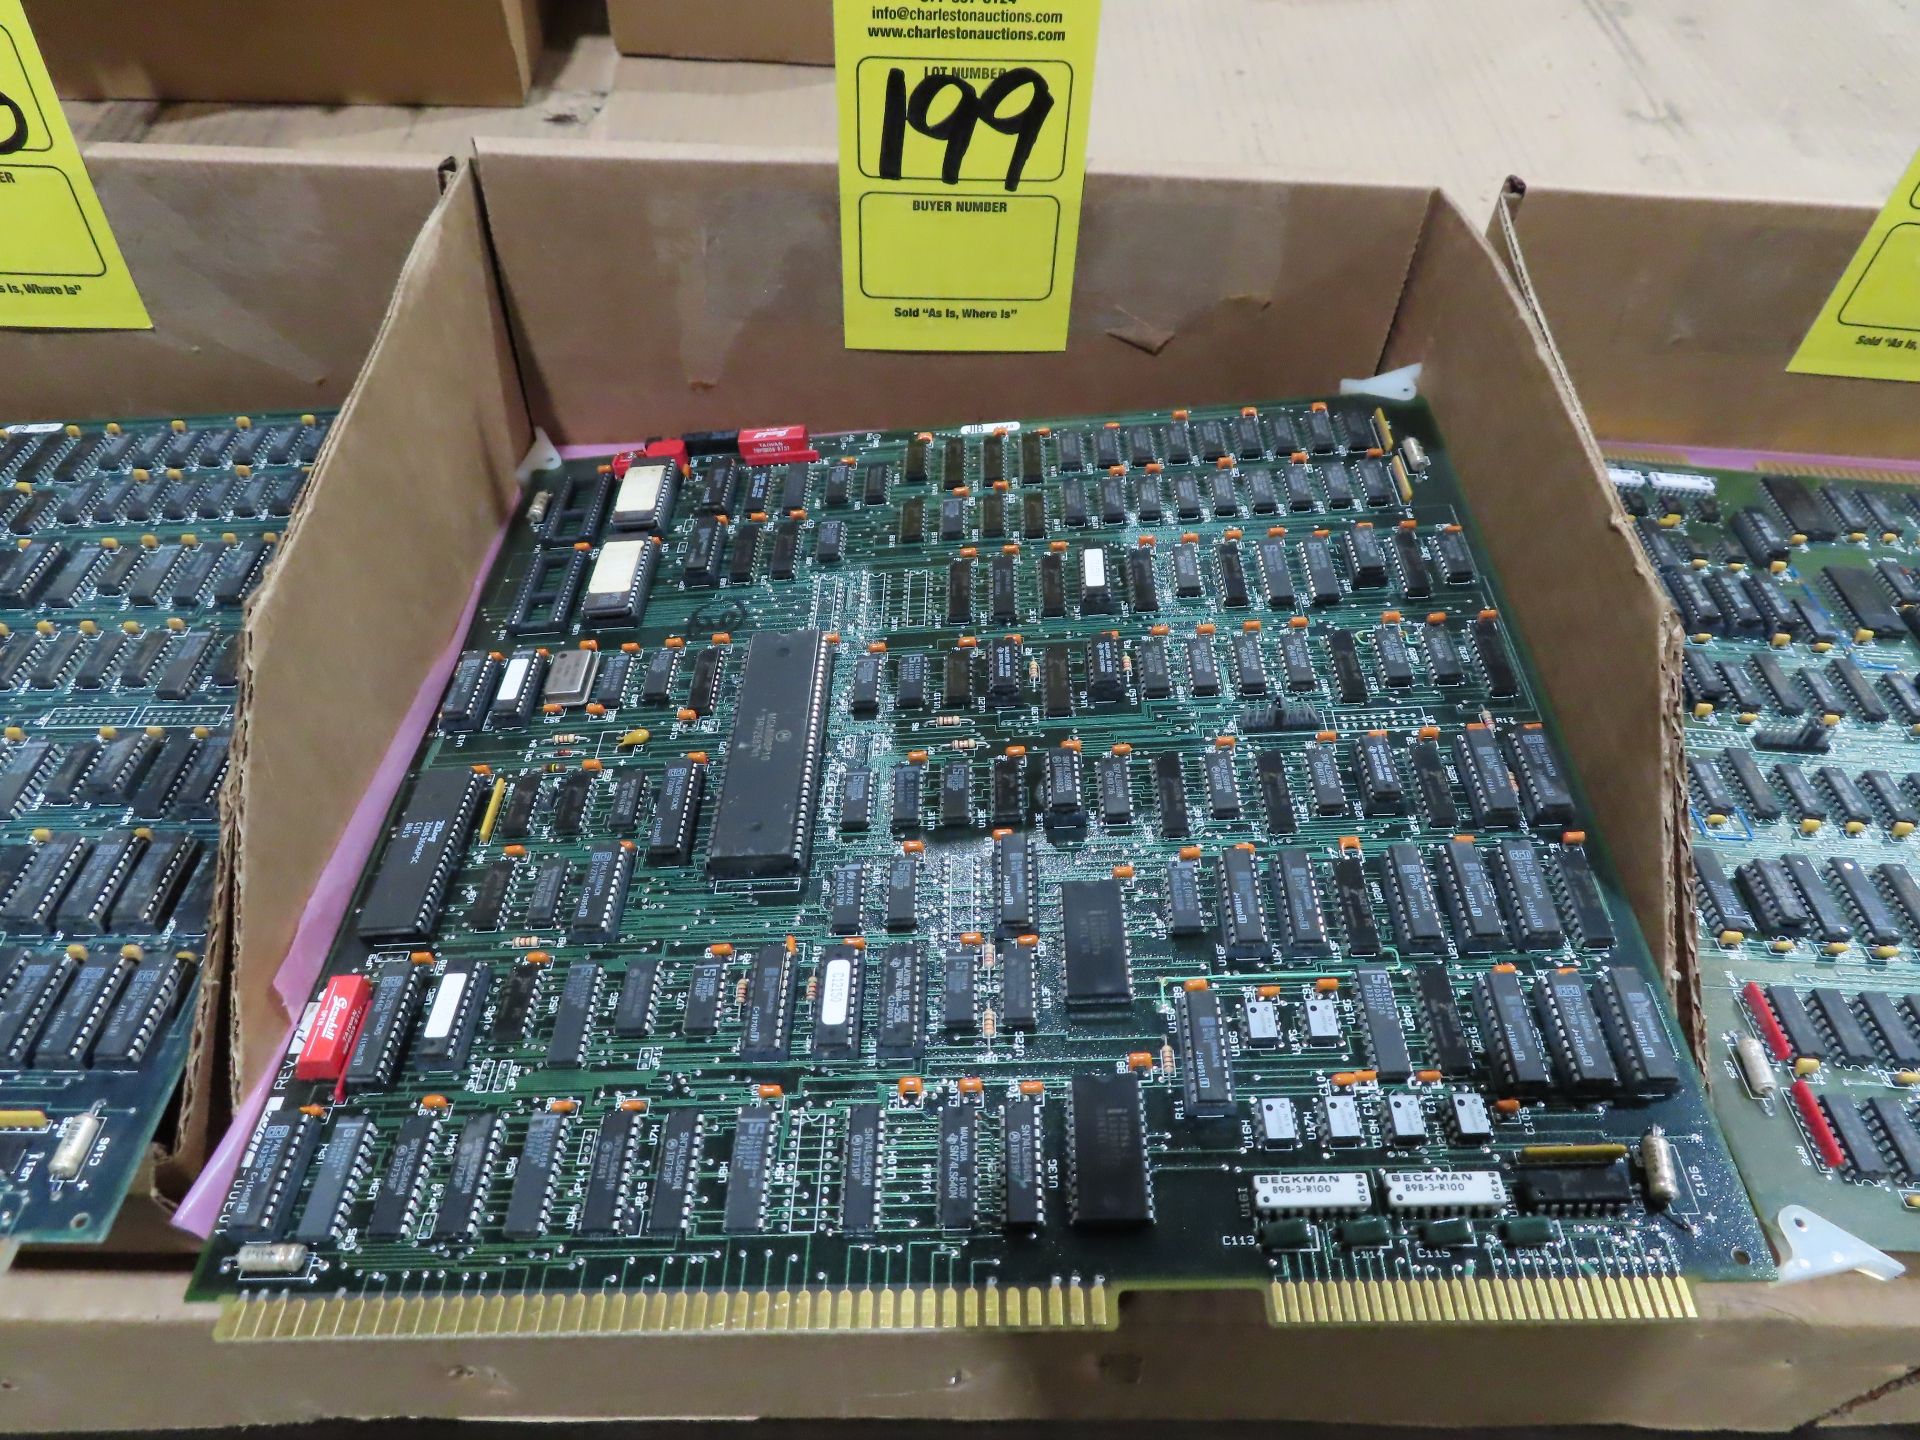 Adept part number 10300-11200 rev N joint interface board, as always, with Brolyn LLC auctions,